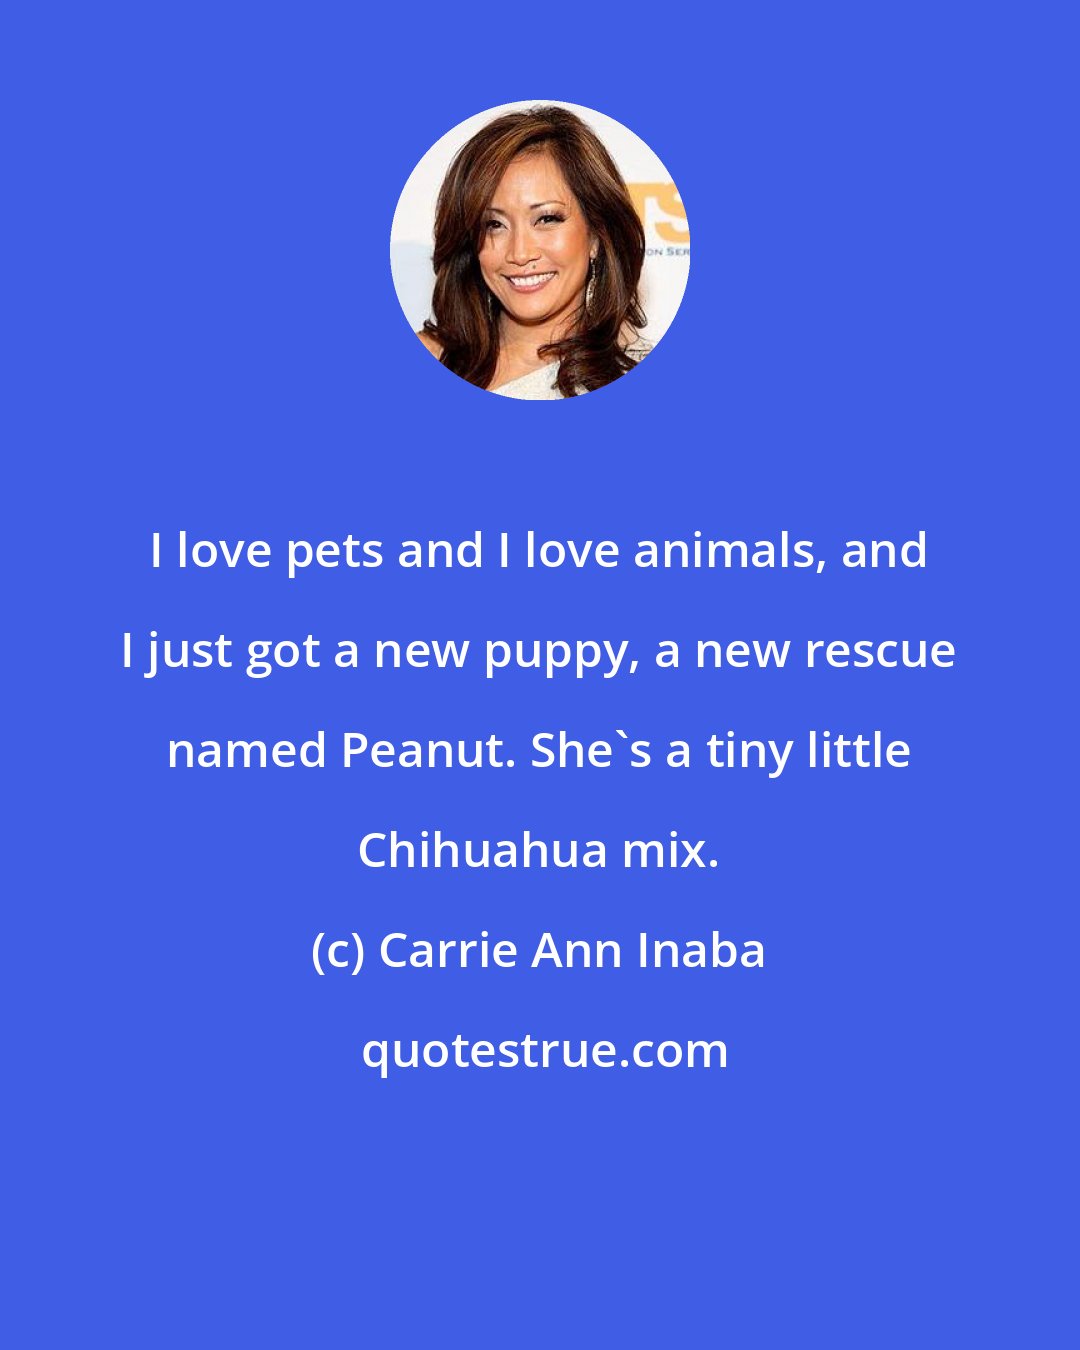 Carrie Ann Inaba: I love pets and I love animals, and I just got a new puppy, a new rescue named Peanut. She's a tiny little Chihuahua mix.